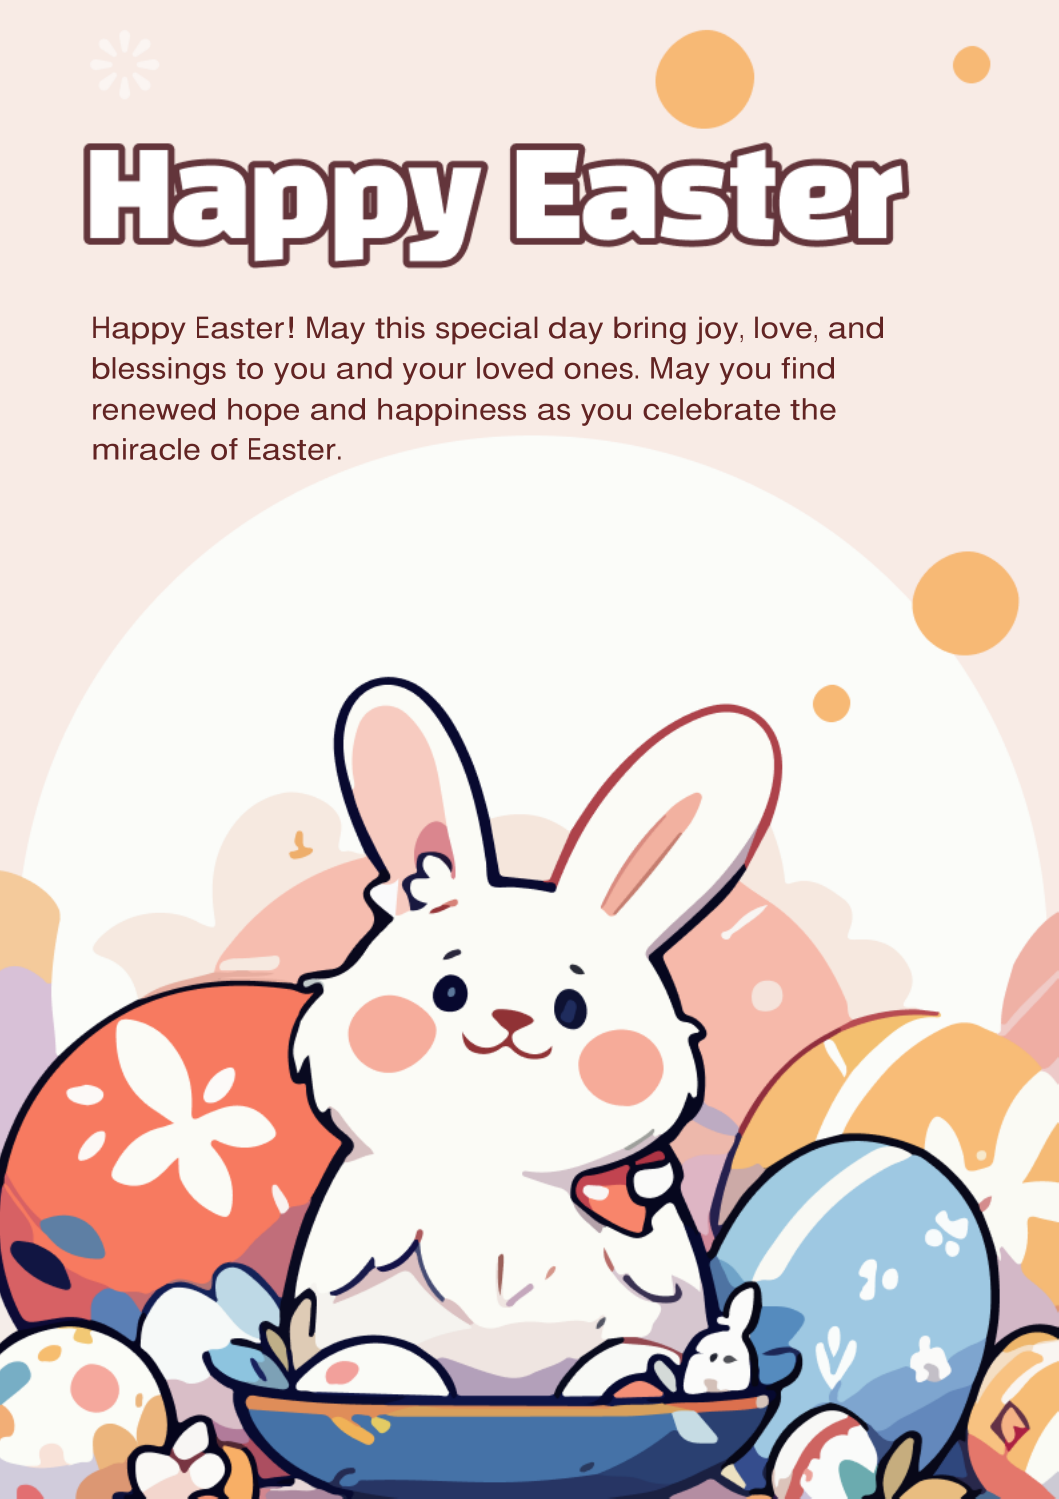 Easter wishes for family and friends 